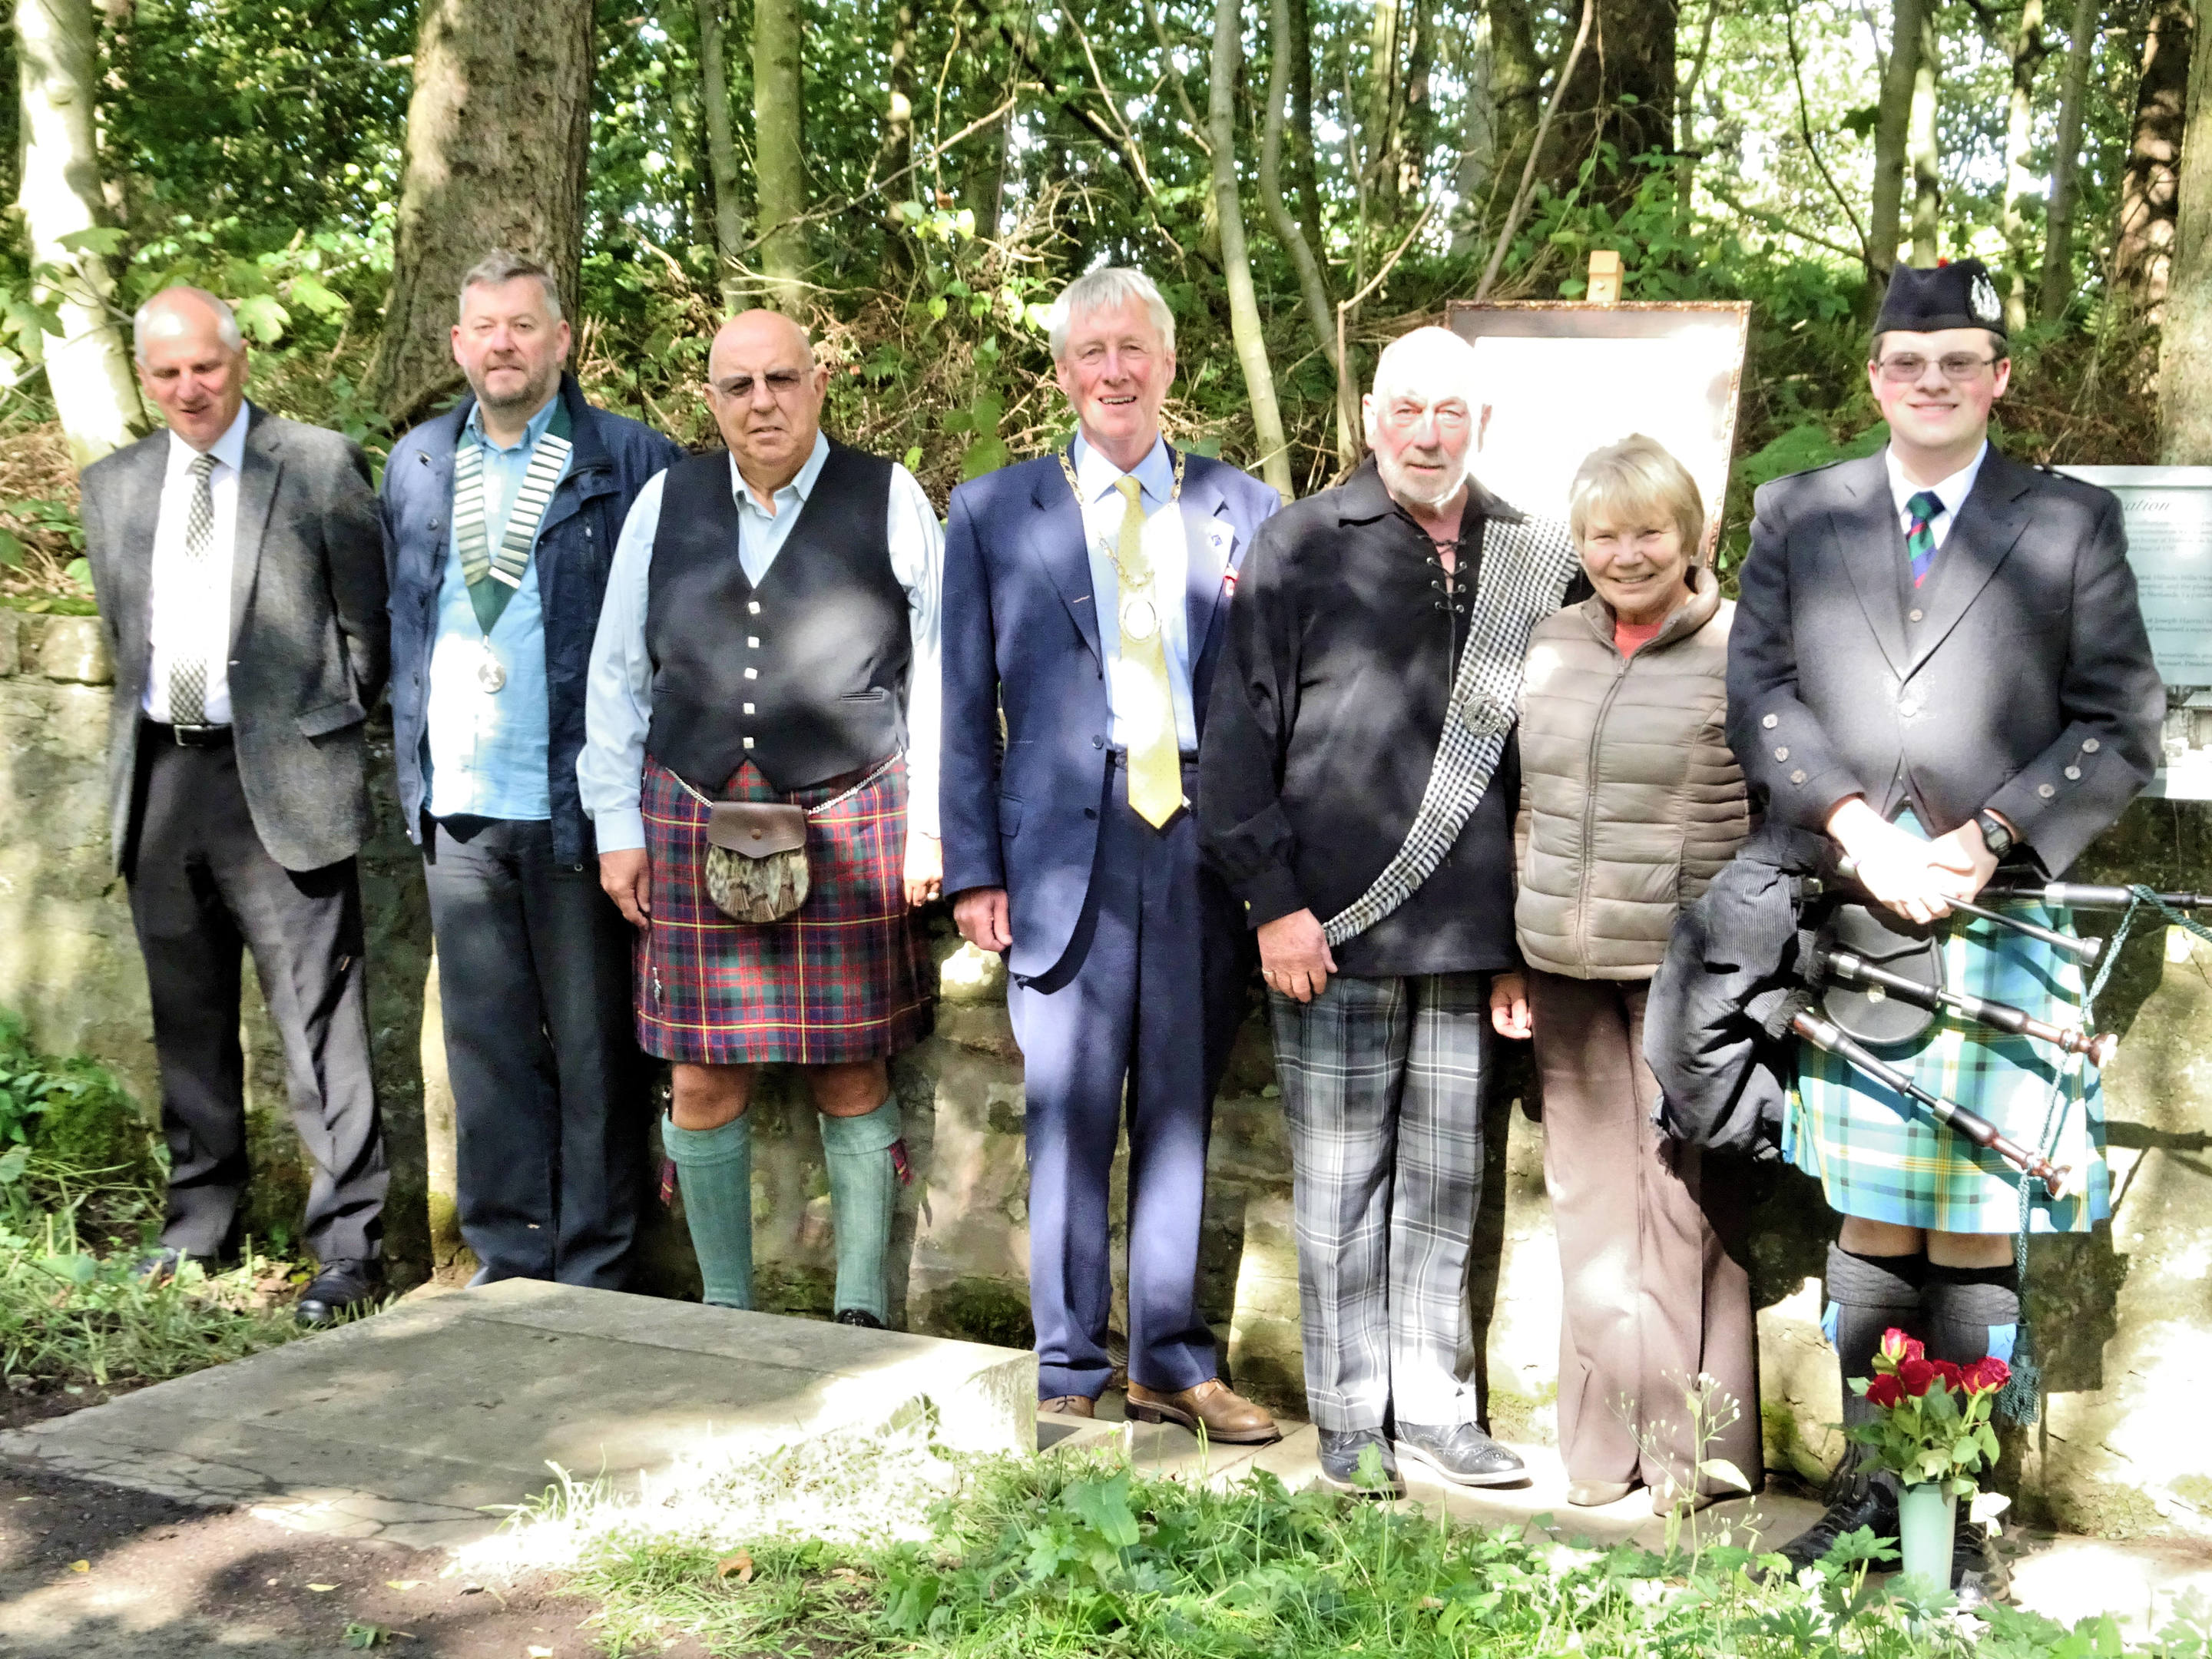 Peter Black, Norrie Braes, Ken Smith, Aberdeenshire Provost Bill Howatson , Dave Ramsay, Gladys Smith and piper Lewis Maitland.